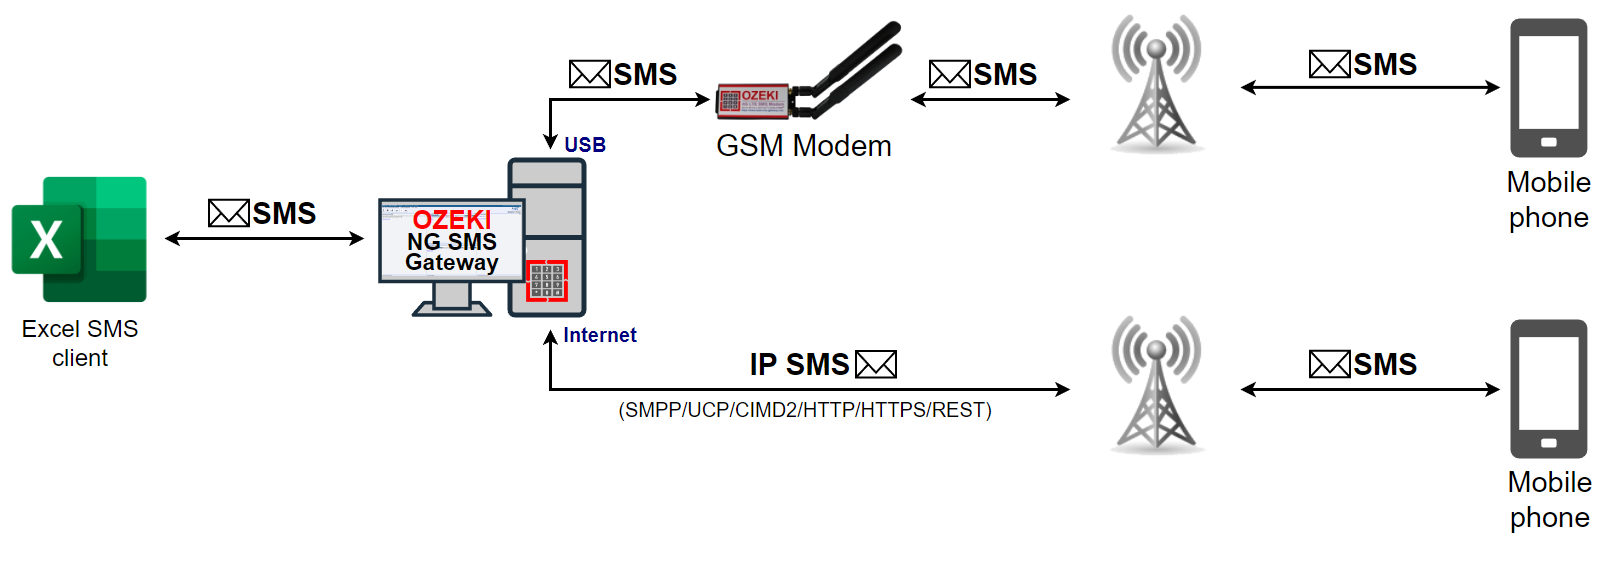 send sms from excel through ozeki ng sms gateway